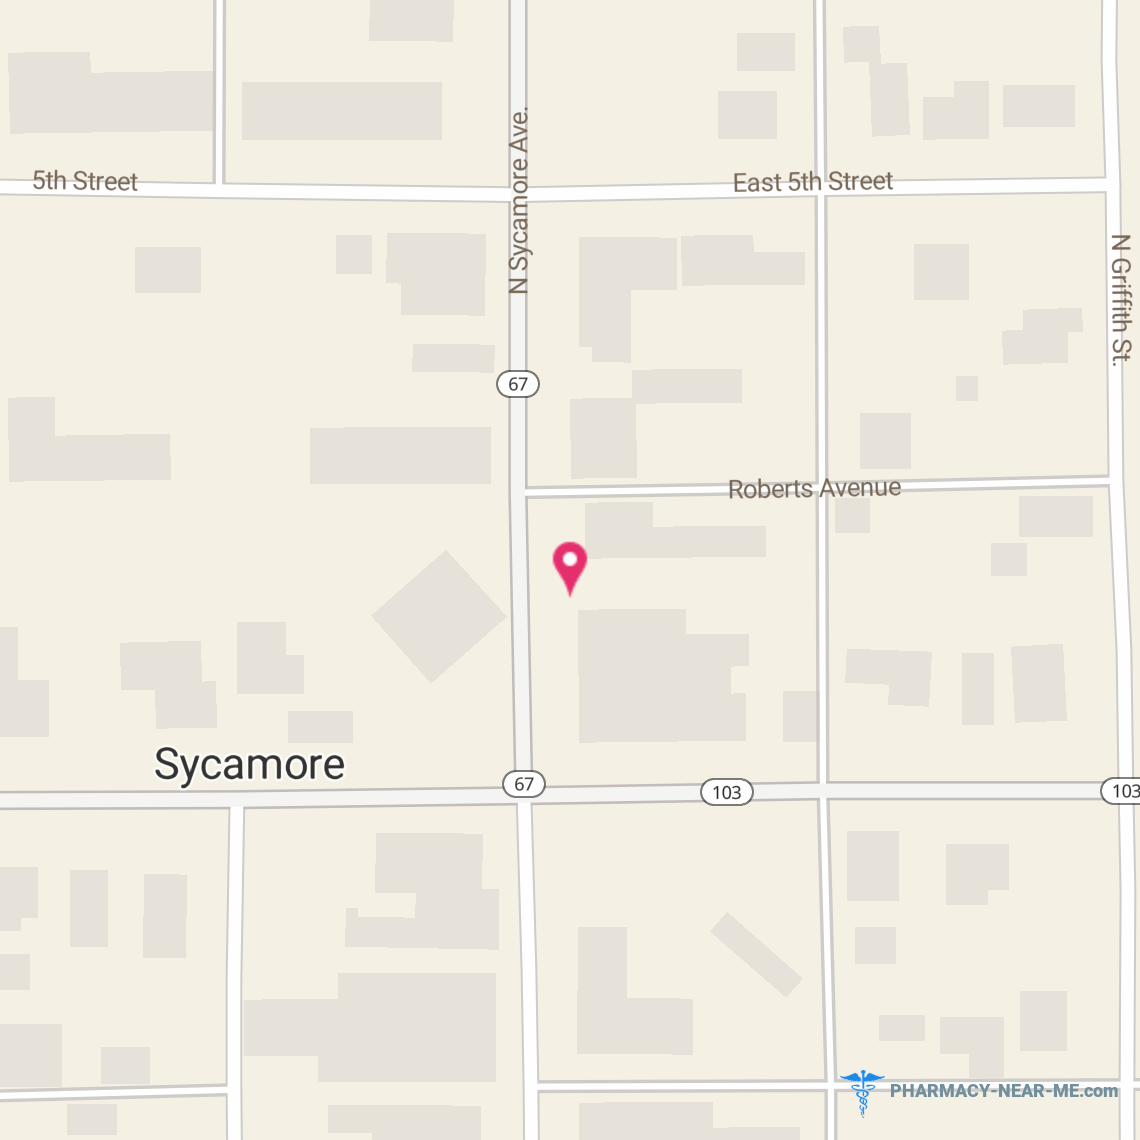 FILLMORE PHARMACY - Pharmacy Hours, Phone, Reviews & Information: 119 South Sycamore Avenue, Sycamore, Ohio 44882, United States